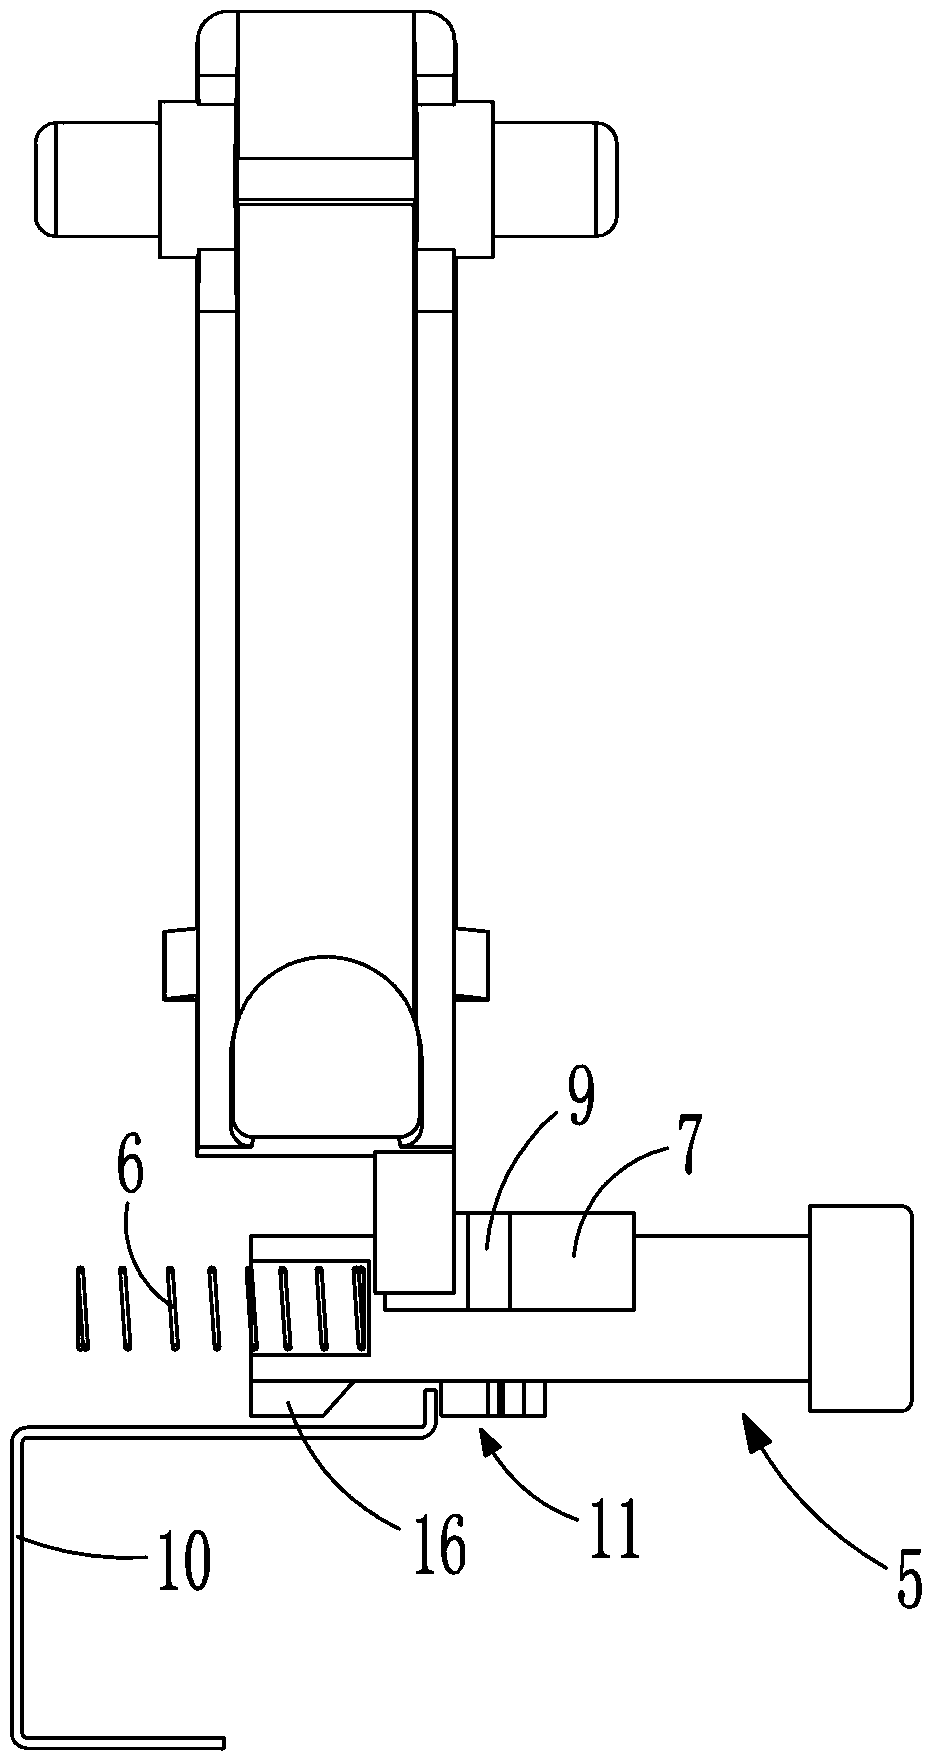 Steaming device